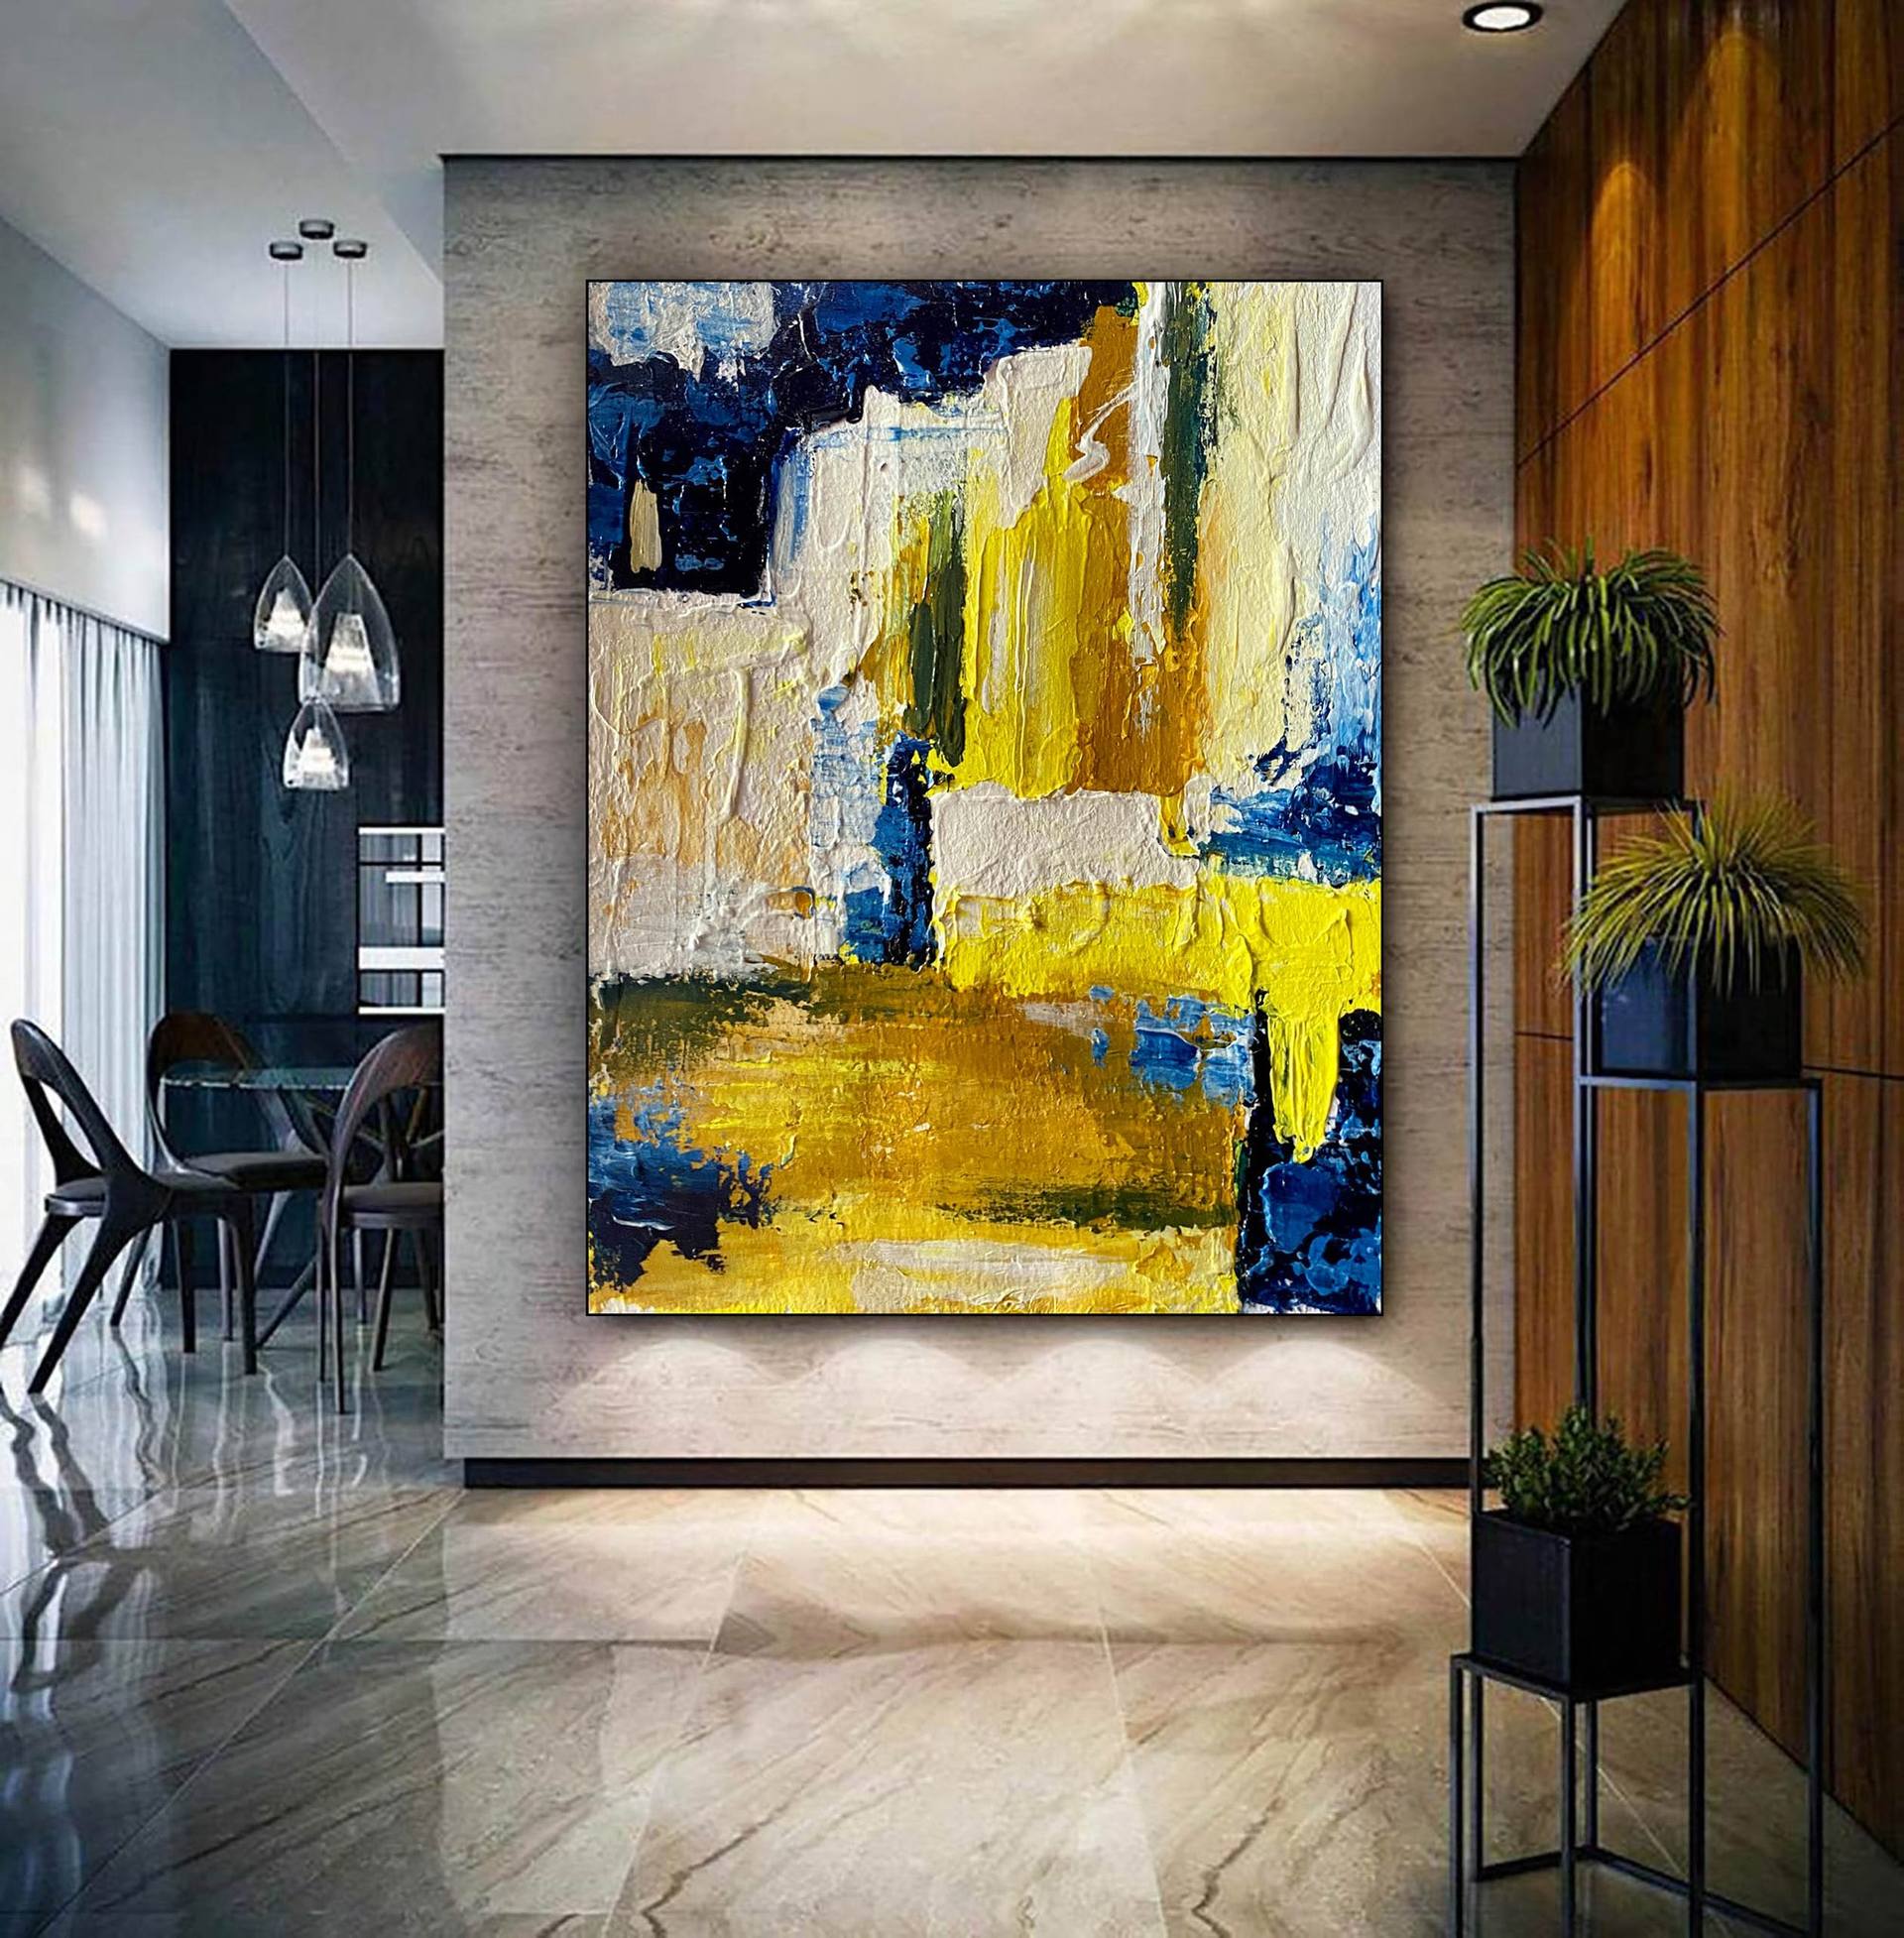 Extra Large Paintings On Canvas, Dorm Decor, Acrylic Painting, Above Bed  Decor, Textured Art, Large Oil Painting-LV-128